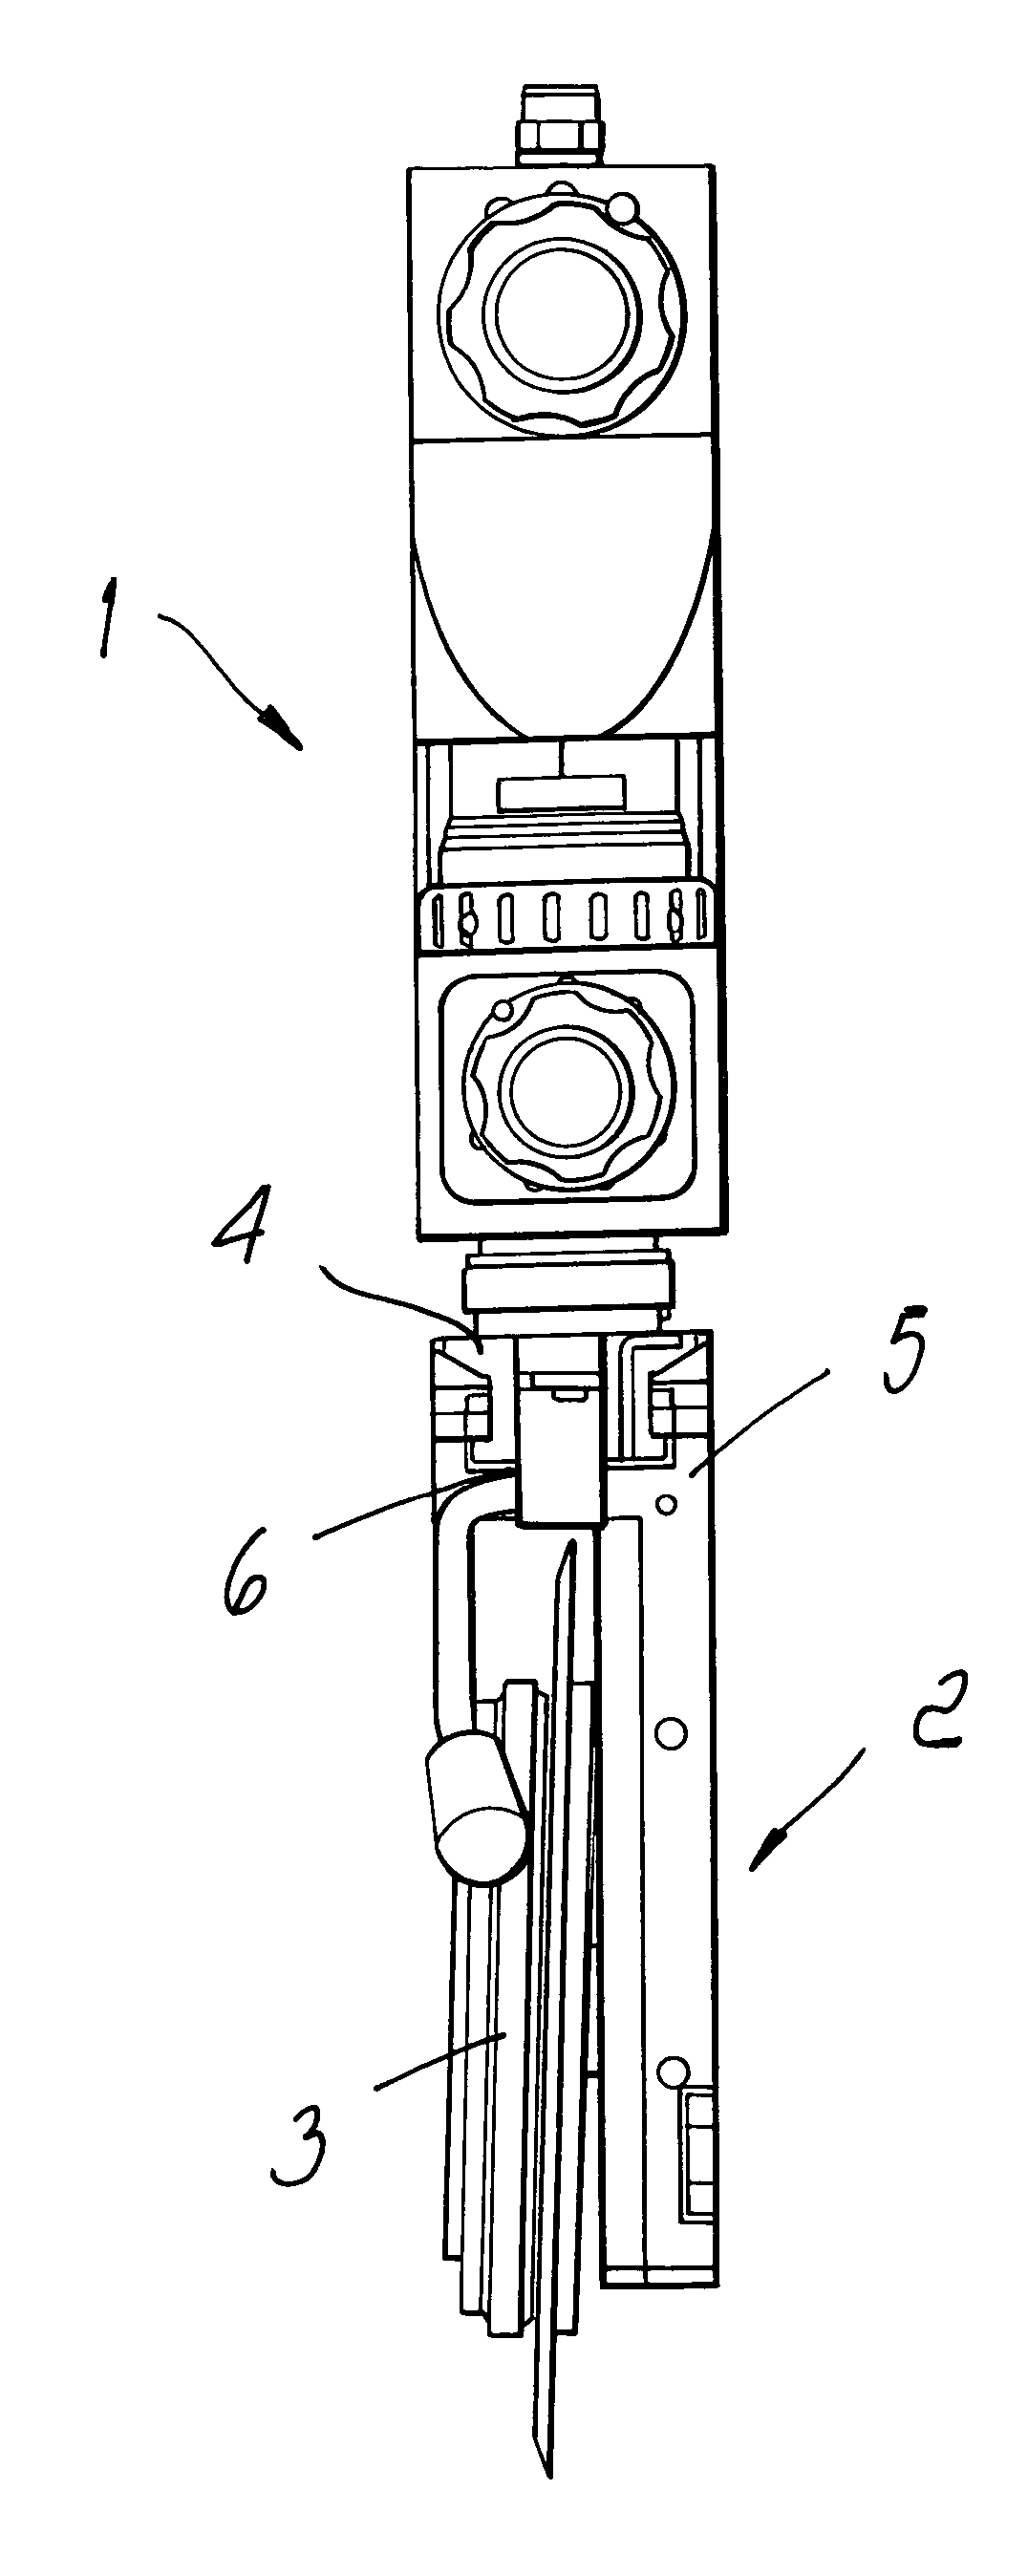 Coupling of the cartridge of a cutter holder for industrial cutting